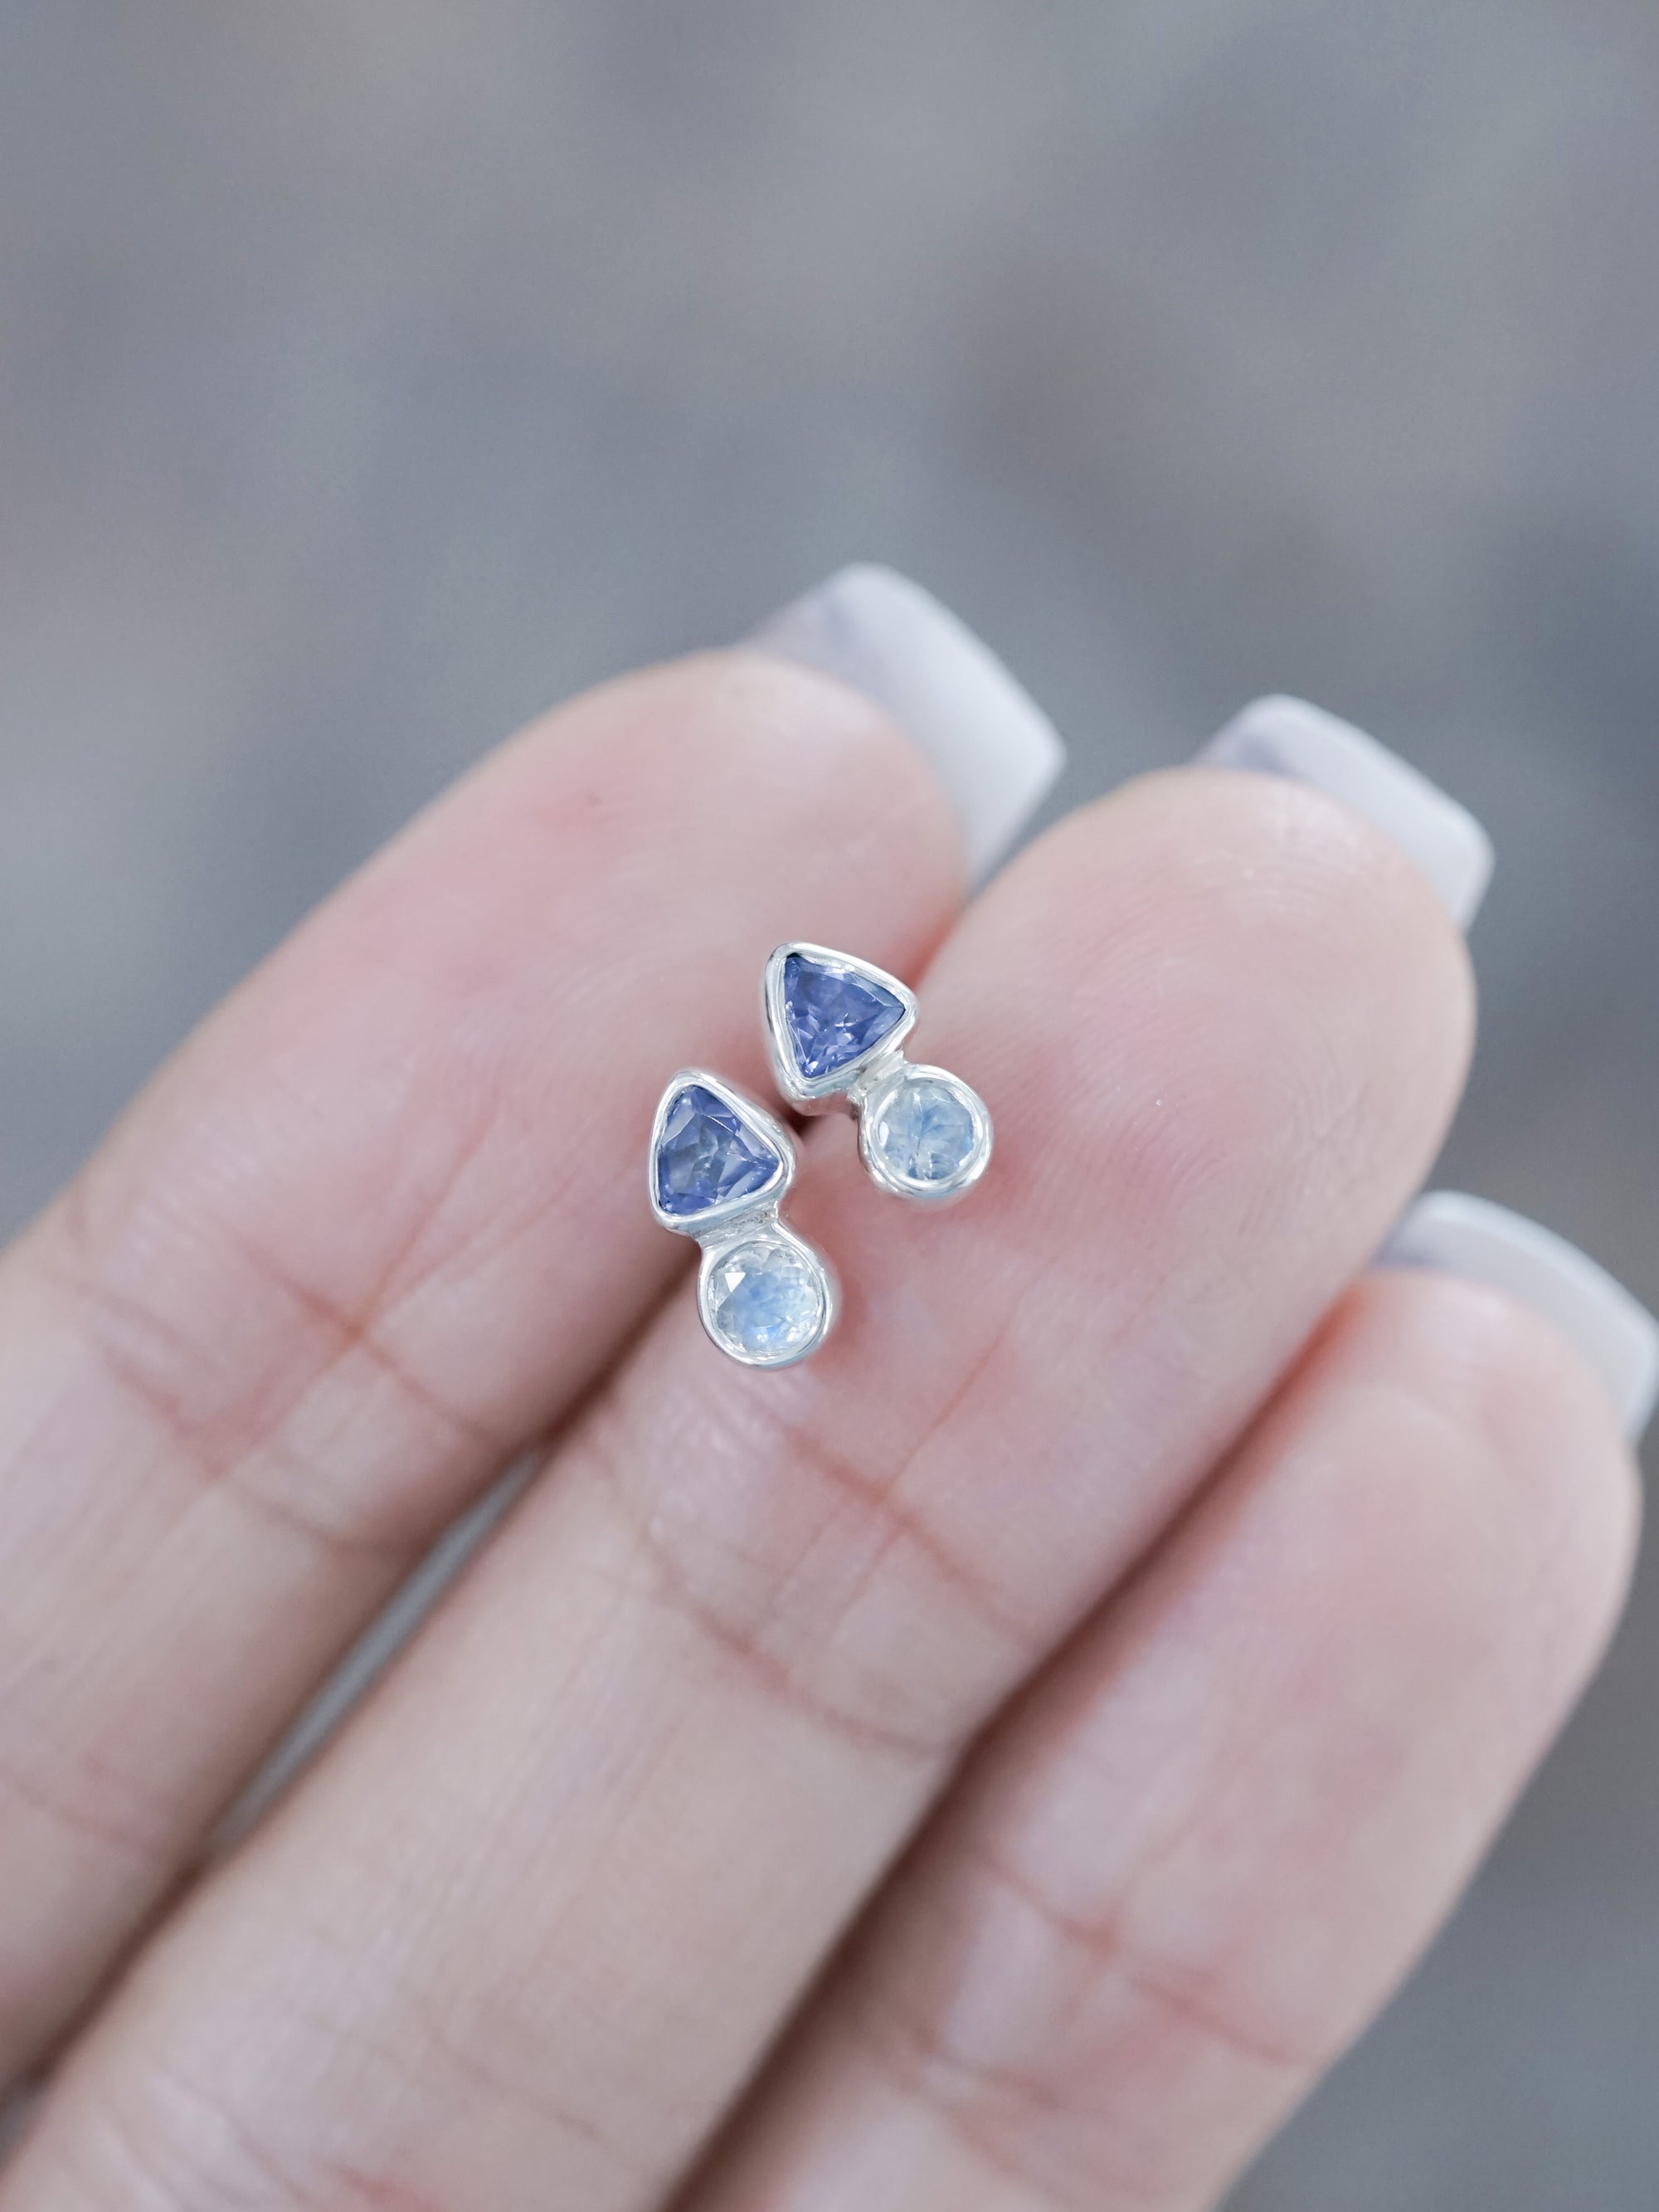 Tanzanite and Moonstone Earrings - Silver